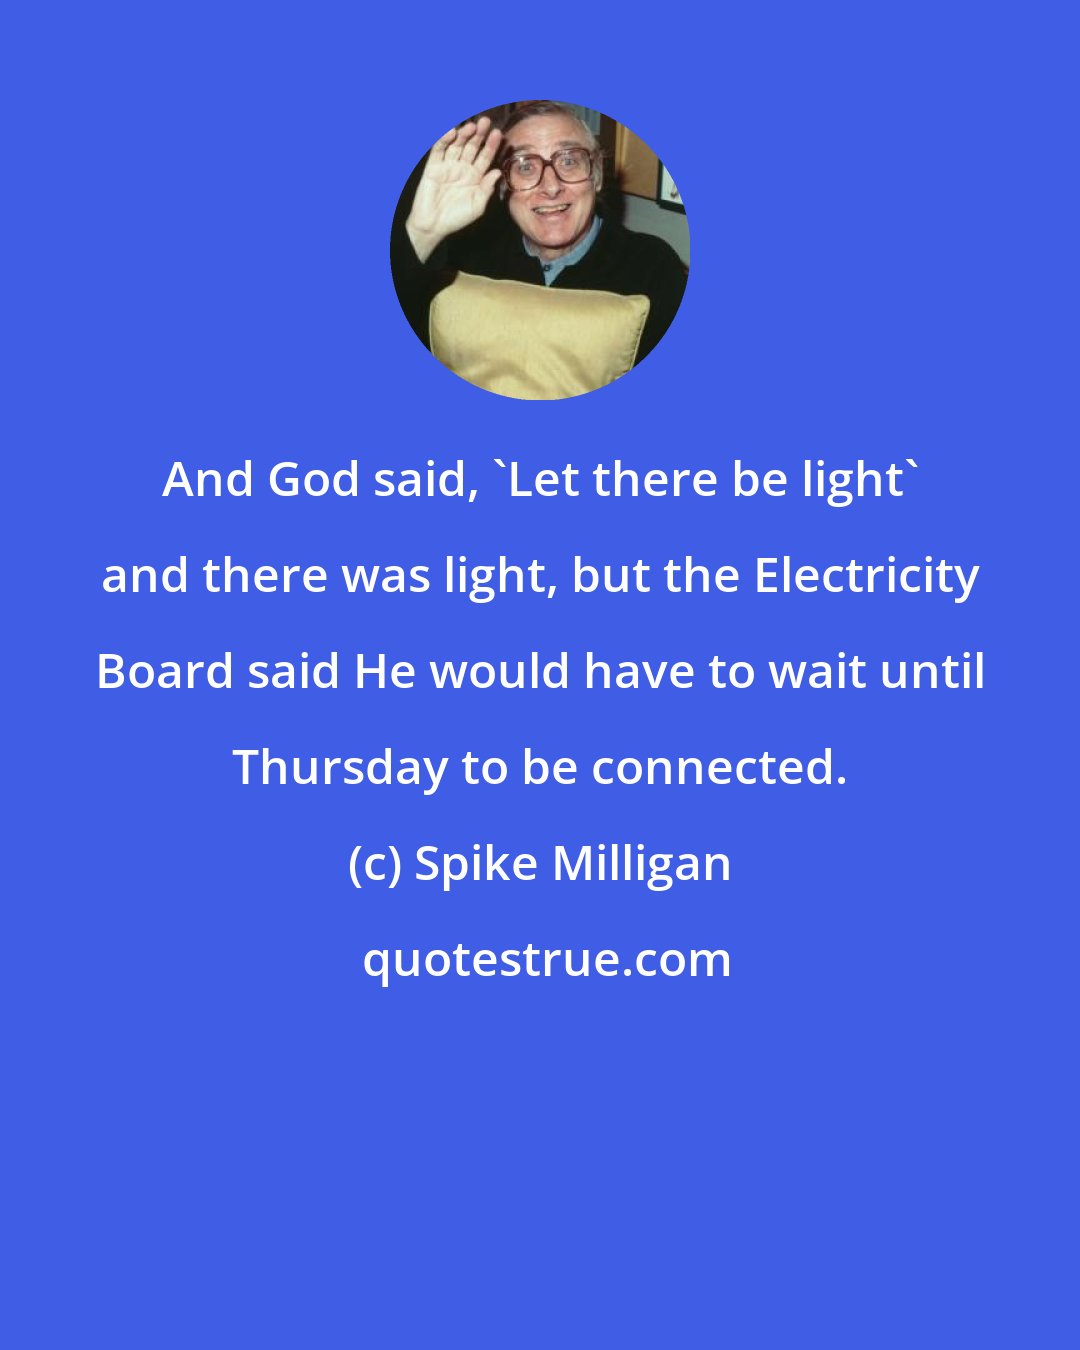 Spike Milligan: And God said, 'Let there be light' and there was light, but the Electricity Board said He would have to wait until Thursday to be connected.